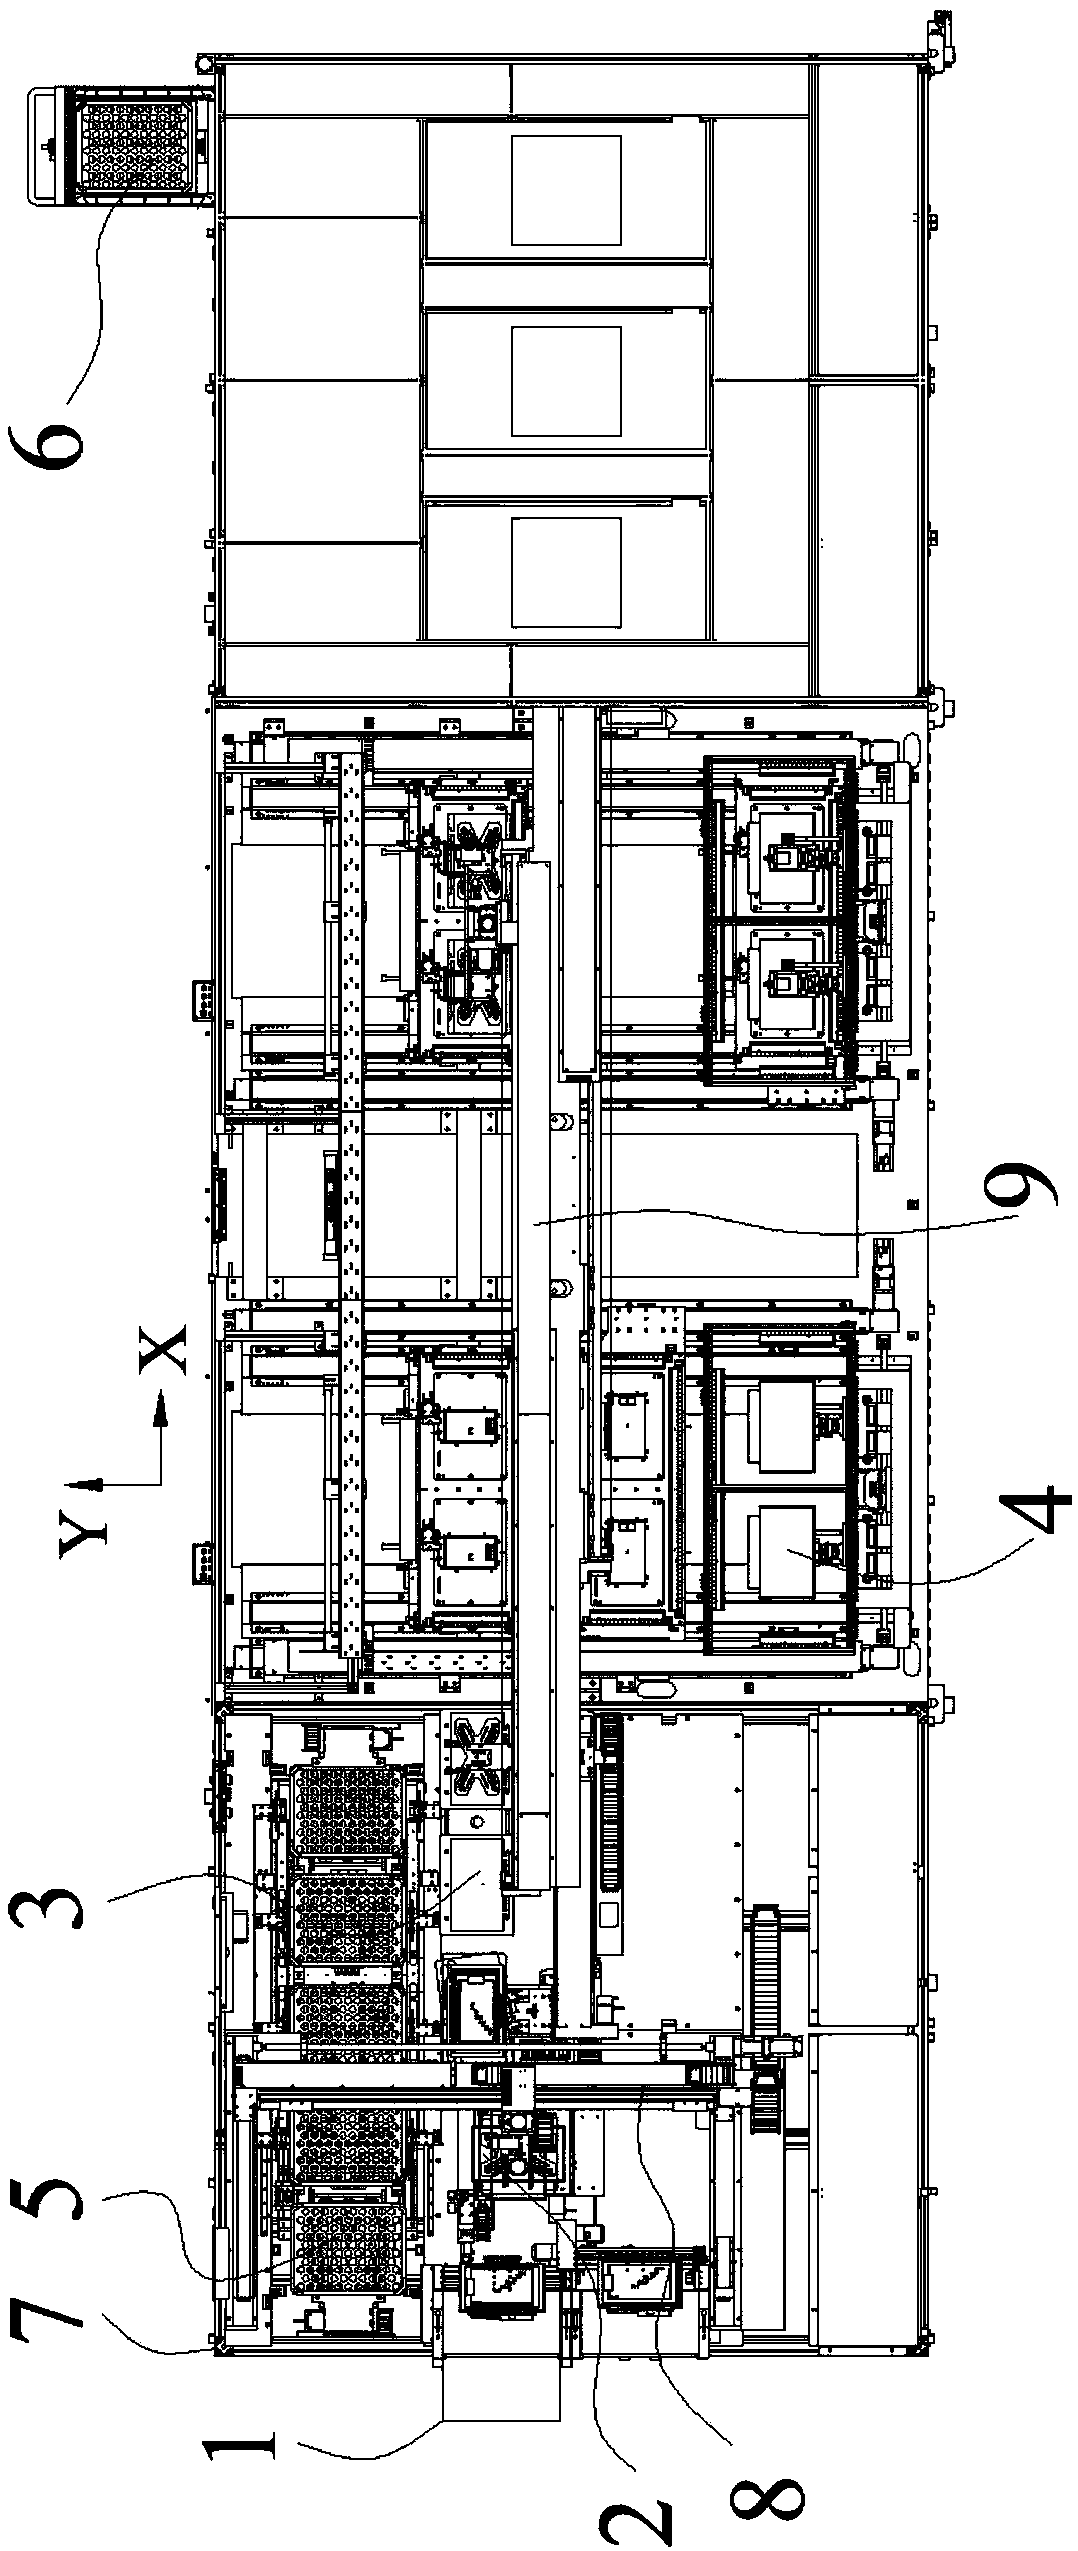 Panel inspection device